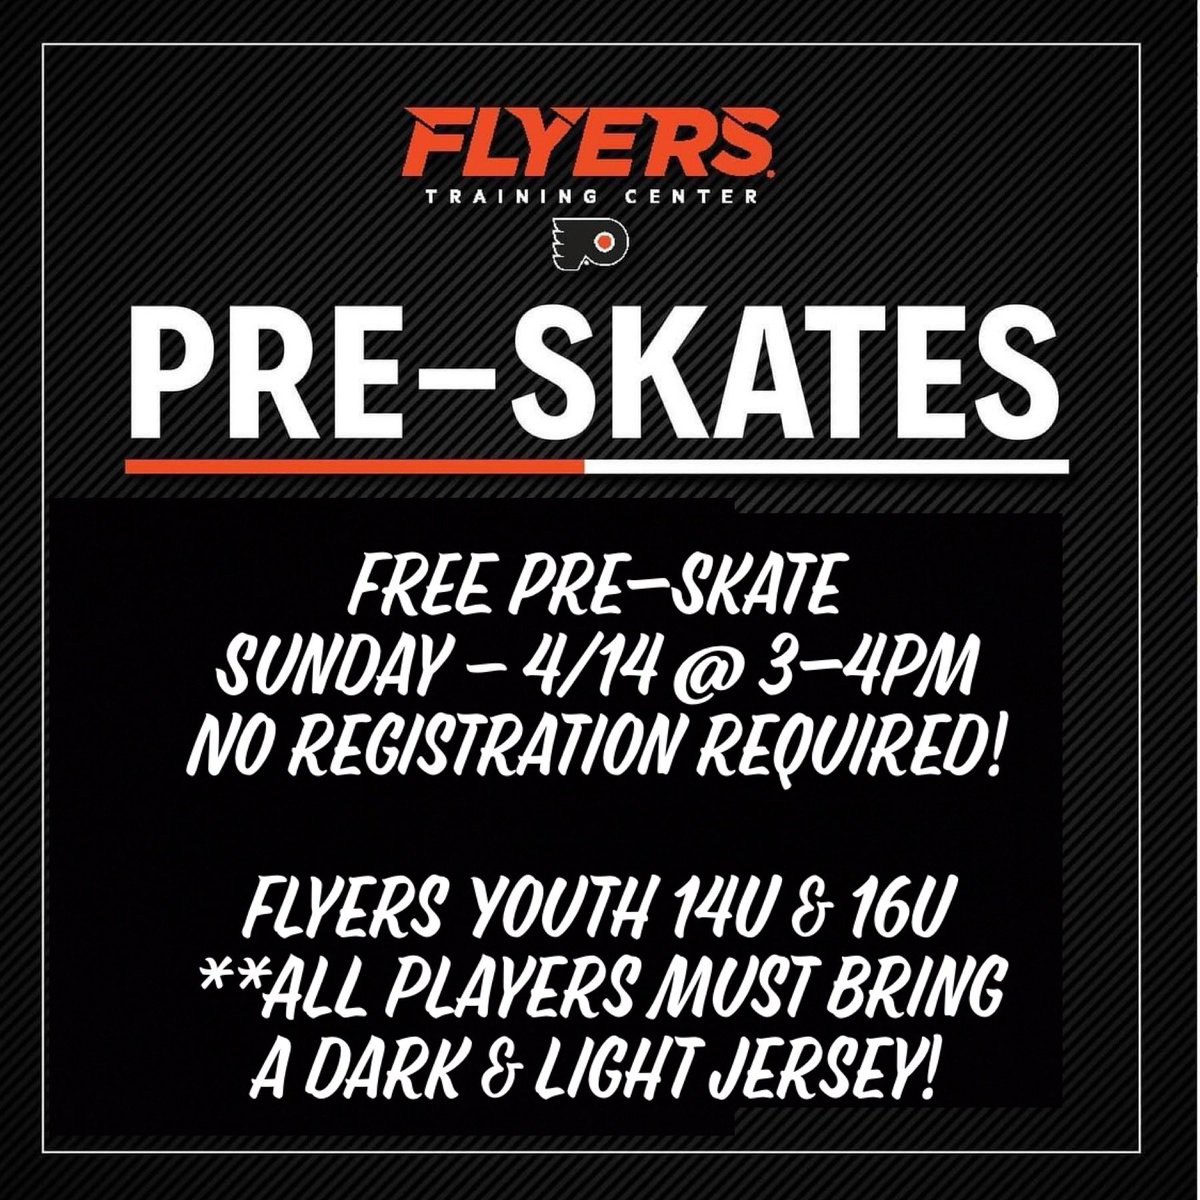 No registration for this, just show up. Flyers Youth 14U & 16U FREE Pre-Skate Sunday – 4/14 @ 3-4pm **All players must bring a dark & light jersey! Come join us at the free Pre-Skate for one last time & to meet the coaches before tryouts. #flyersyouthhc🏒🥅 #preskates #free